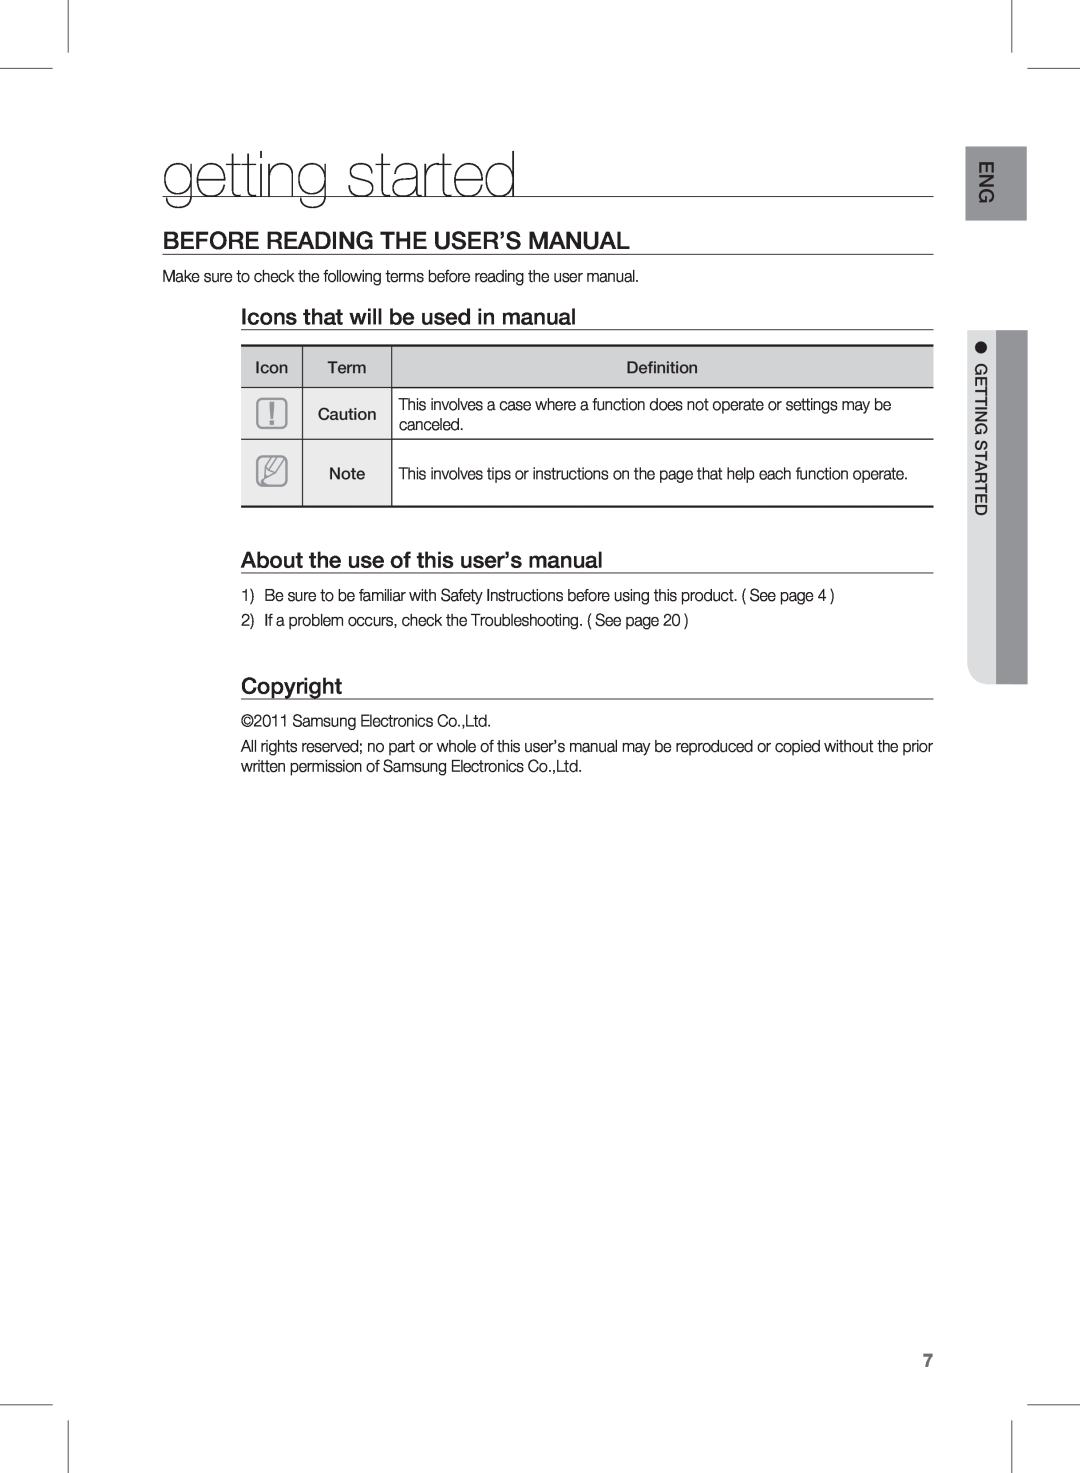 Siemens HW-D450 user manual getting started, Icons that will be used in manual, Copyright 